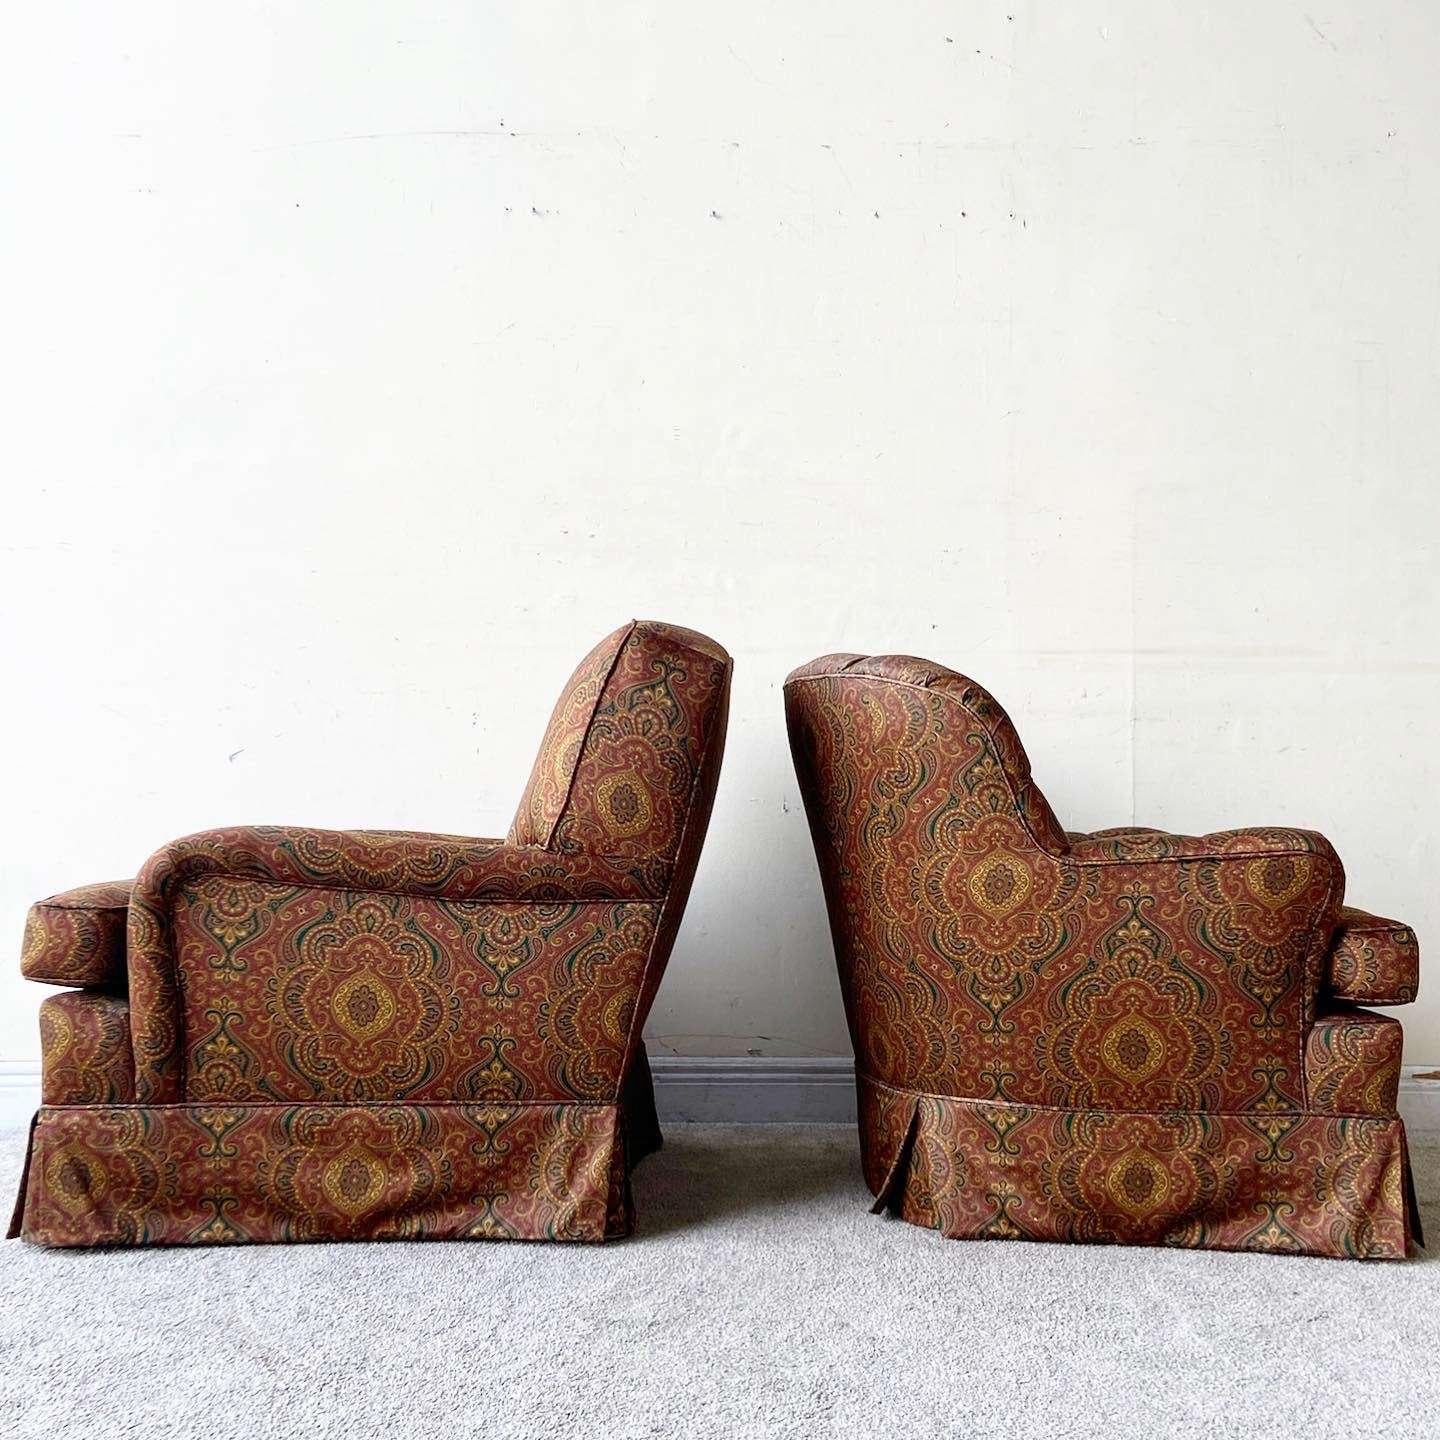 Late 20th Century Mid Century Modern Him and Hers Lounge Chairs For Sale